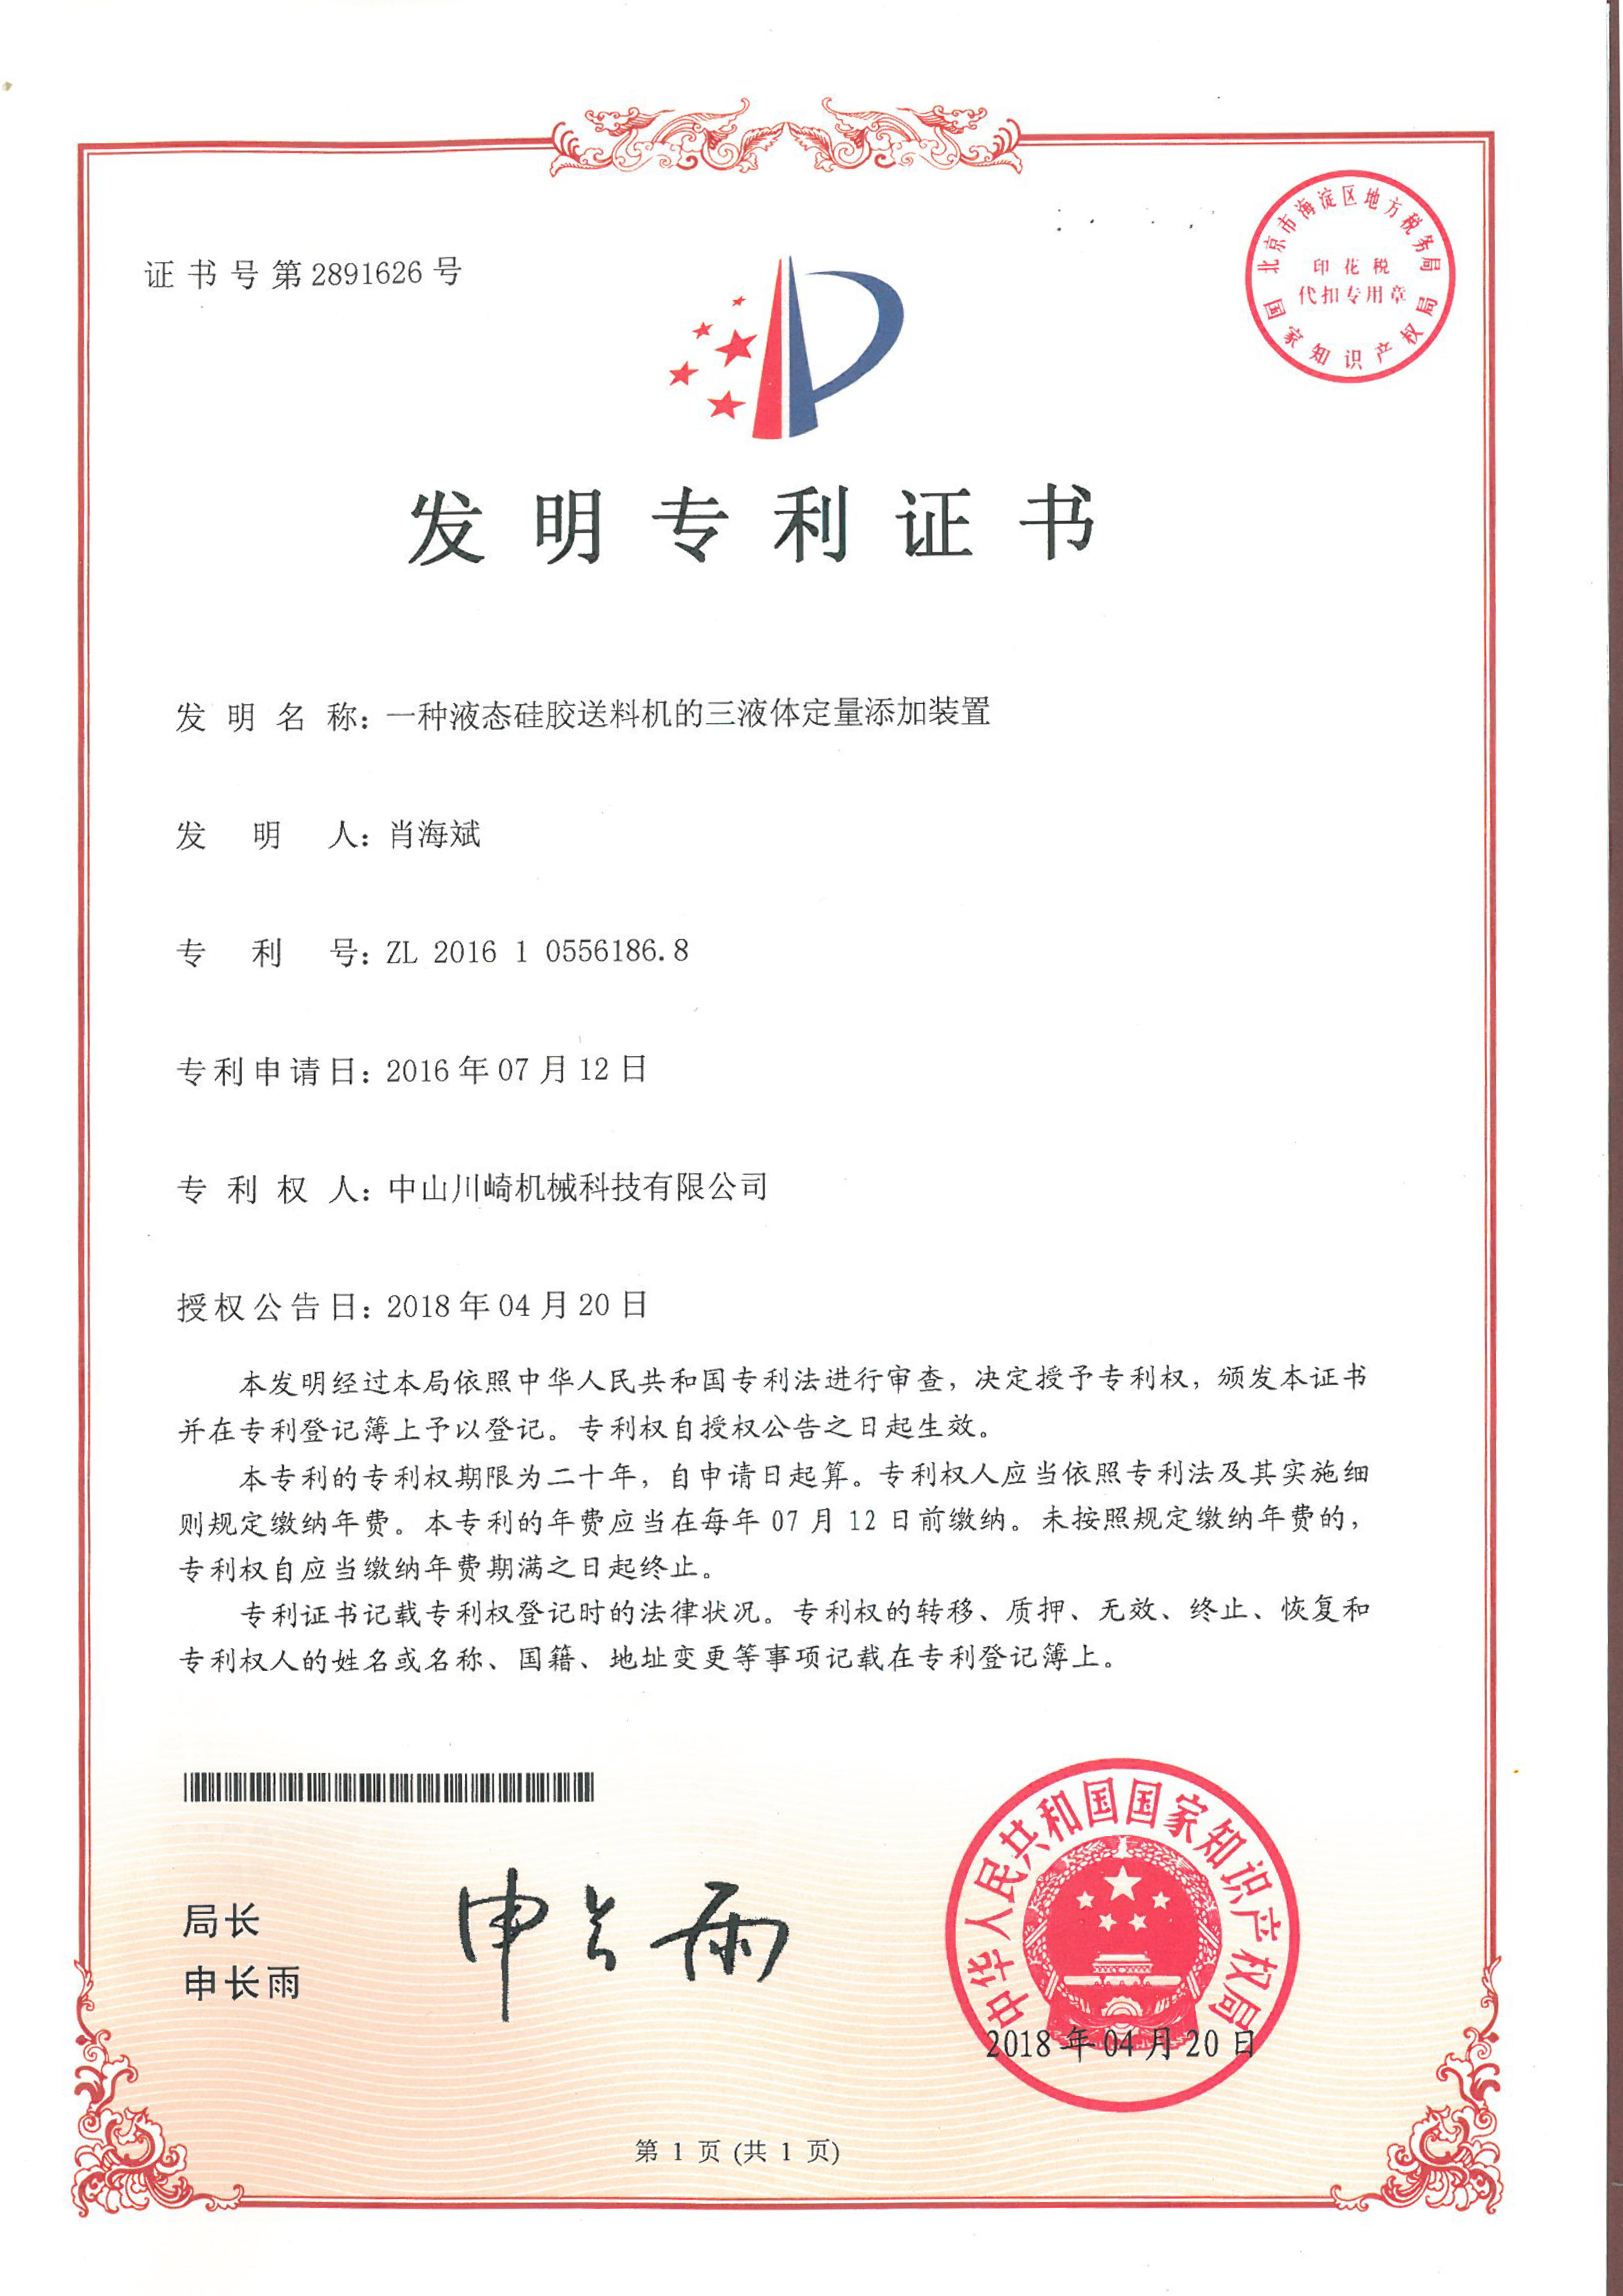 Invention Certificate